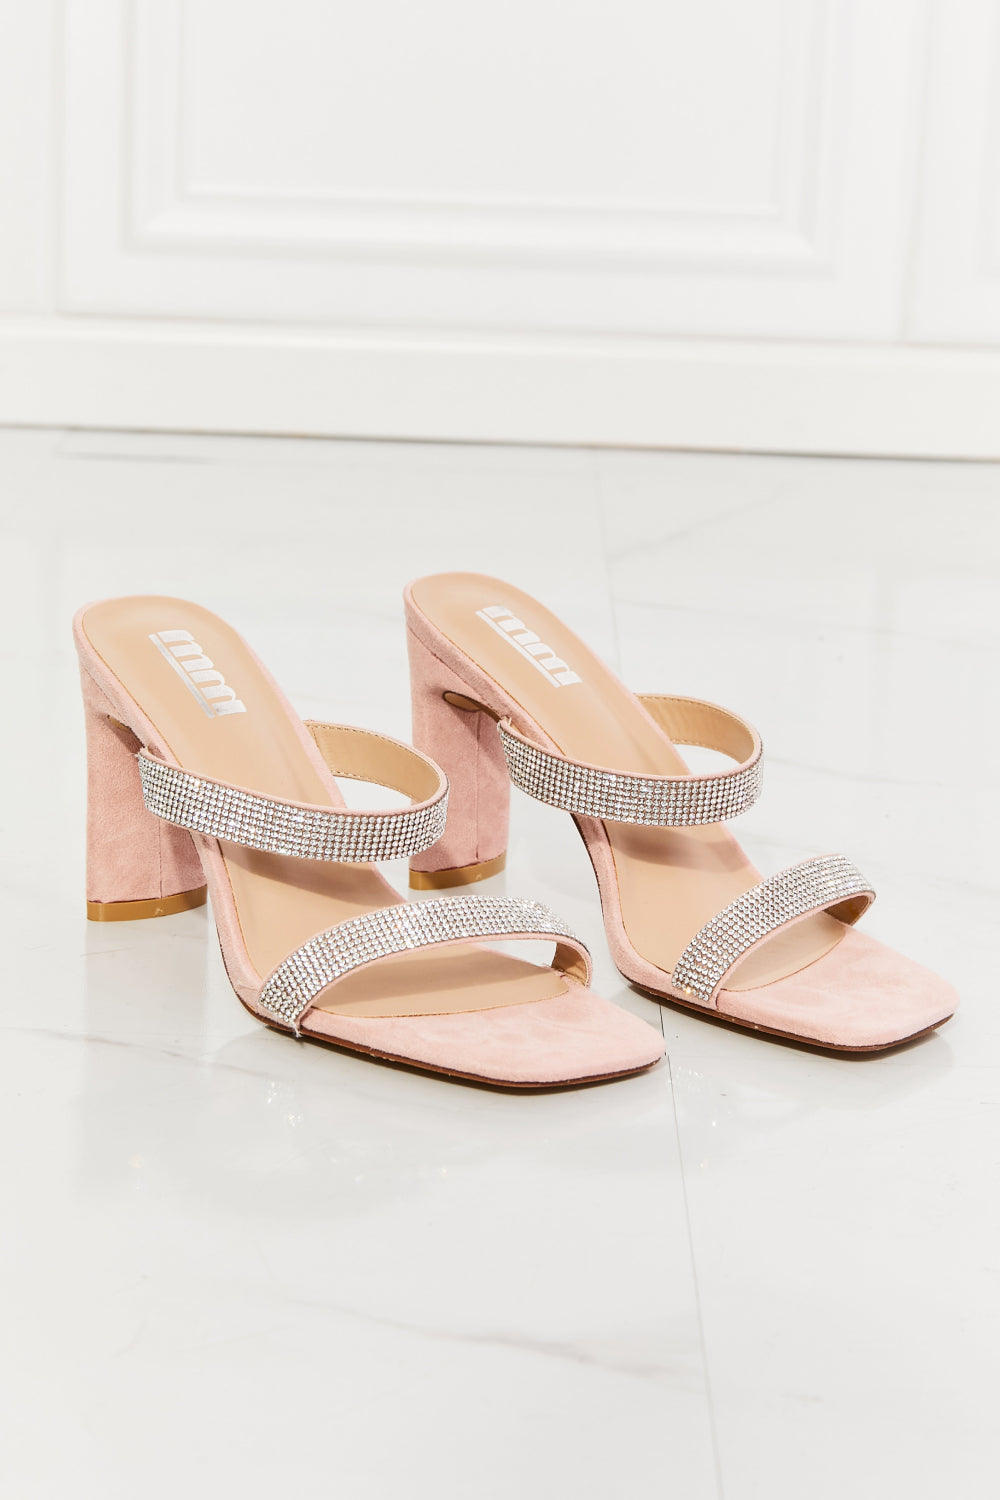 MMShoes Leave A Little Sparkle Rhinestone Block Heel Sandal in Pink - Thandynie